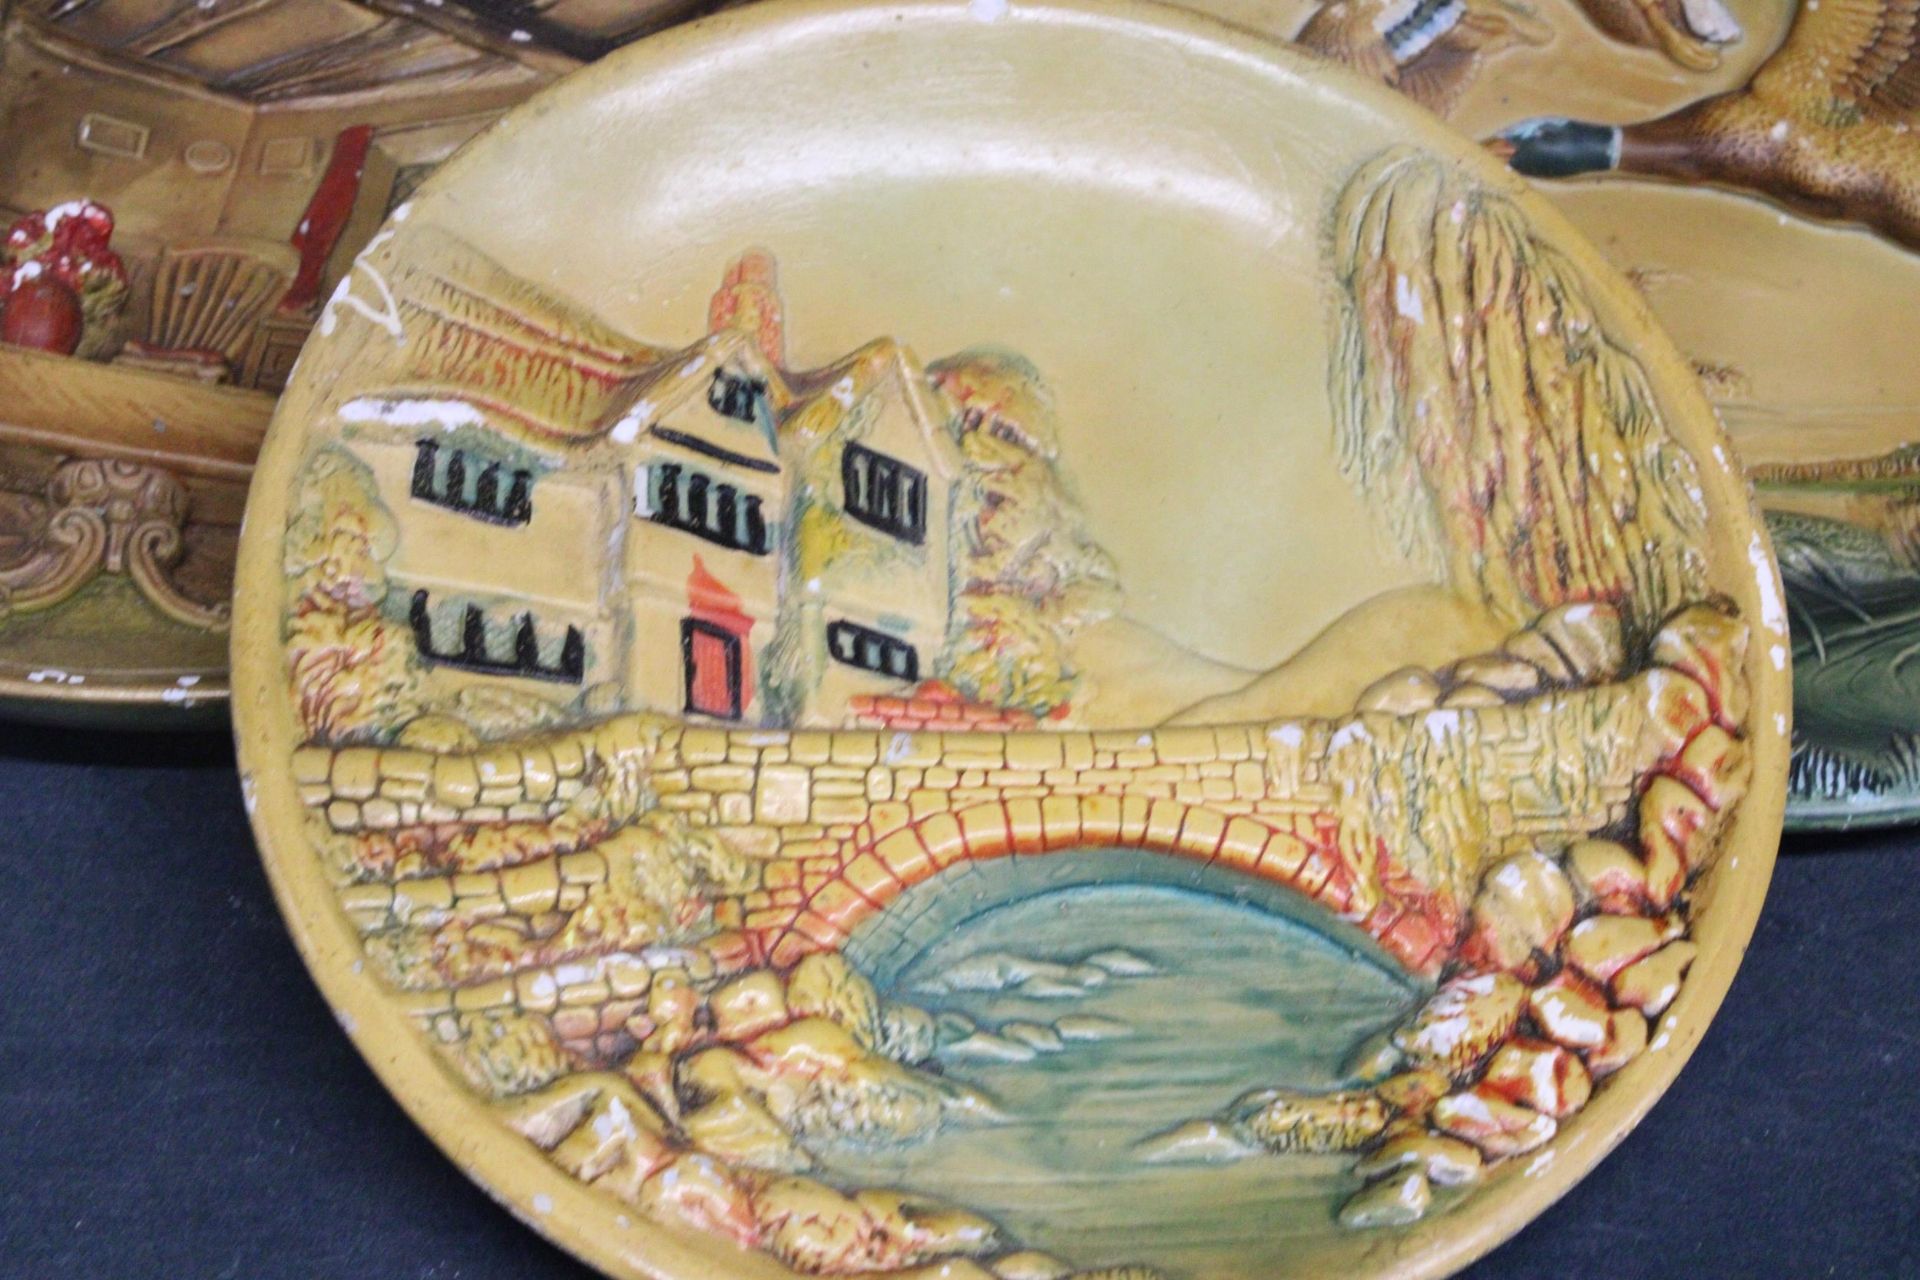 FIVE LARGE 3-D CHALKWARE VINTAGE PLATES WITH IMAGES OF HOUSES AND DUCKS - Image 2 of 6